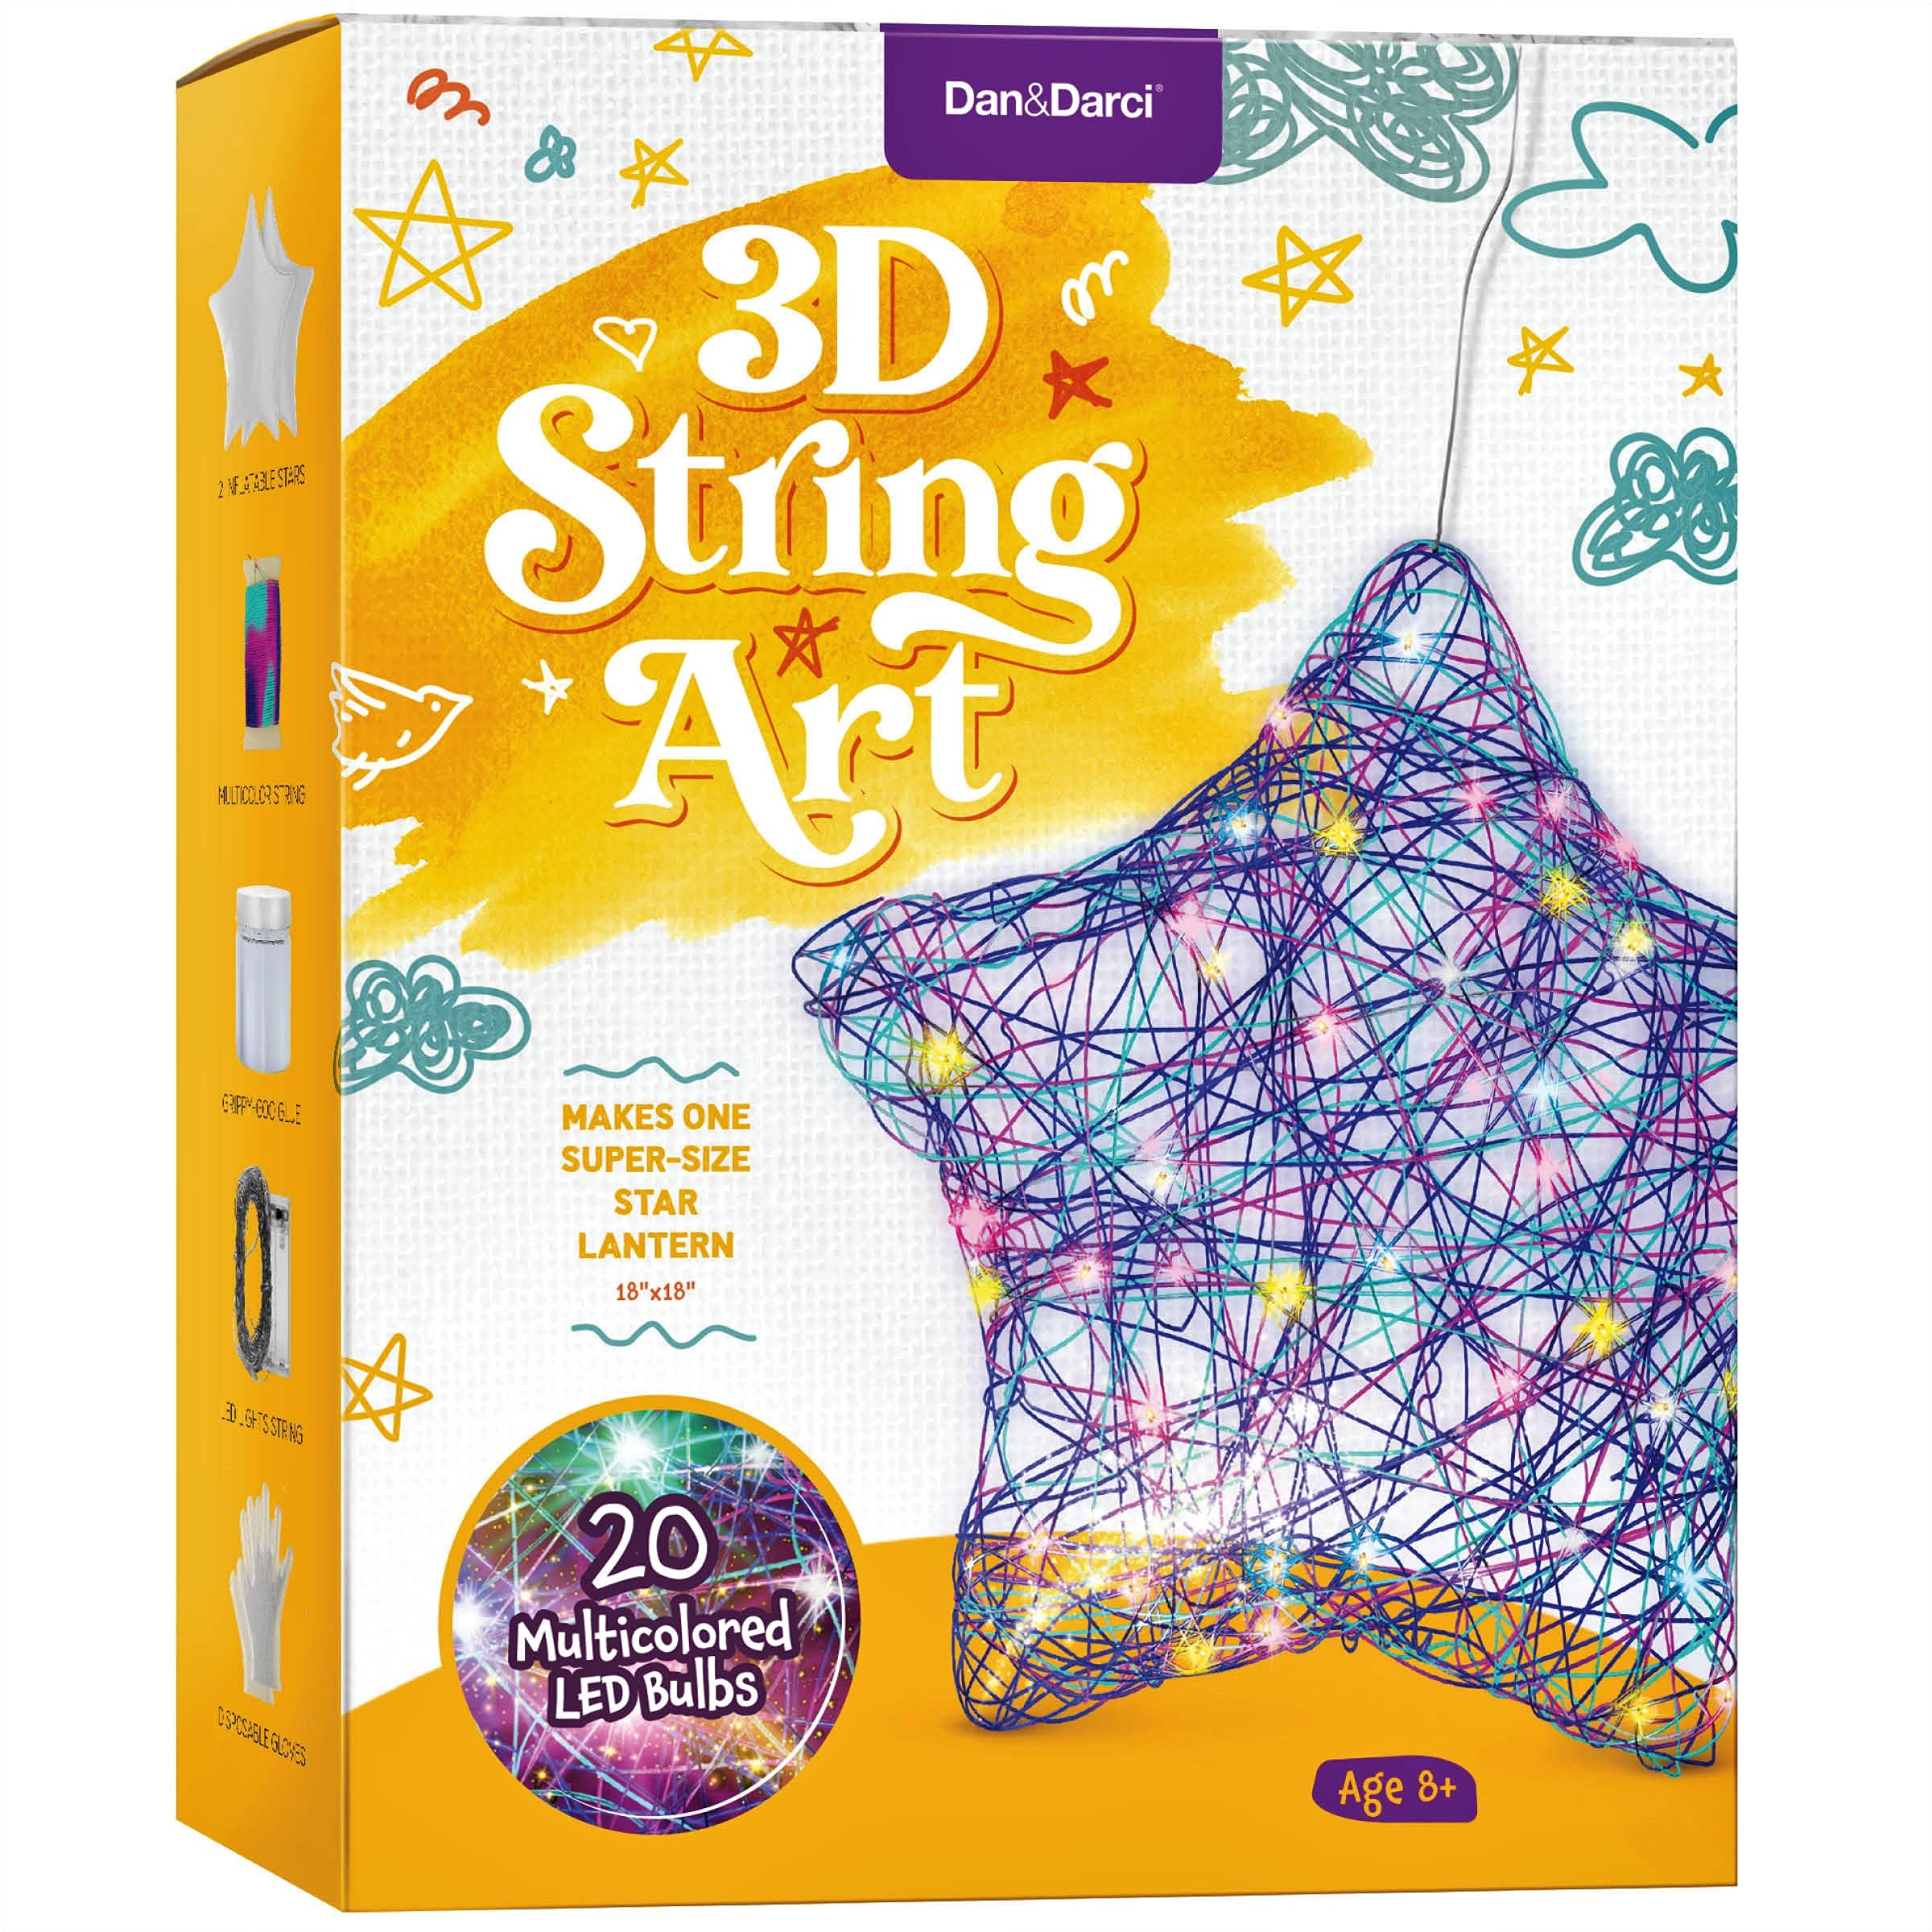 3D Light-up String Art Kit for Kids - Star Lantern Making Kit w/ 20 LEDs - Kids Gifts - Crafts Set for Girls and Boys Ages 8-12 Kid - DIY Arts & Craft Kits for Age 8, 9, 10, 11, 12 Year Old Girl Gift